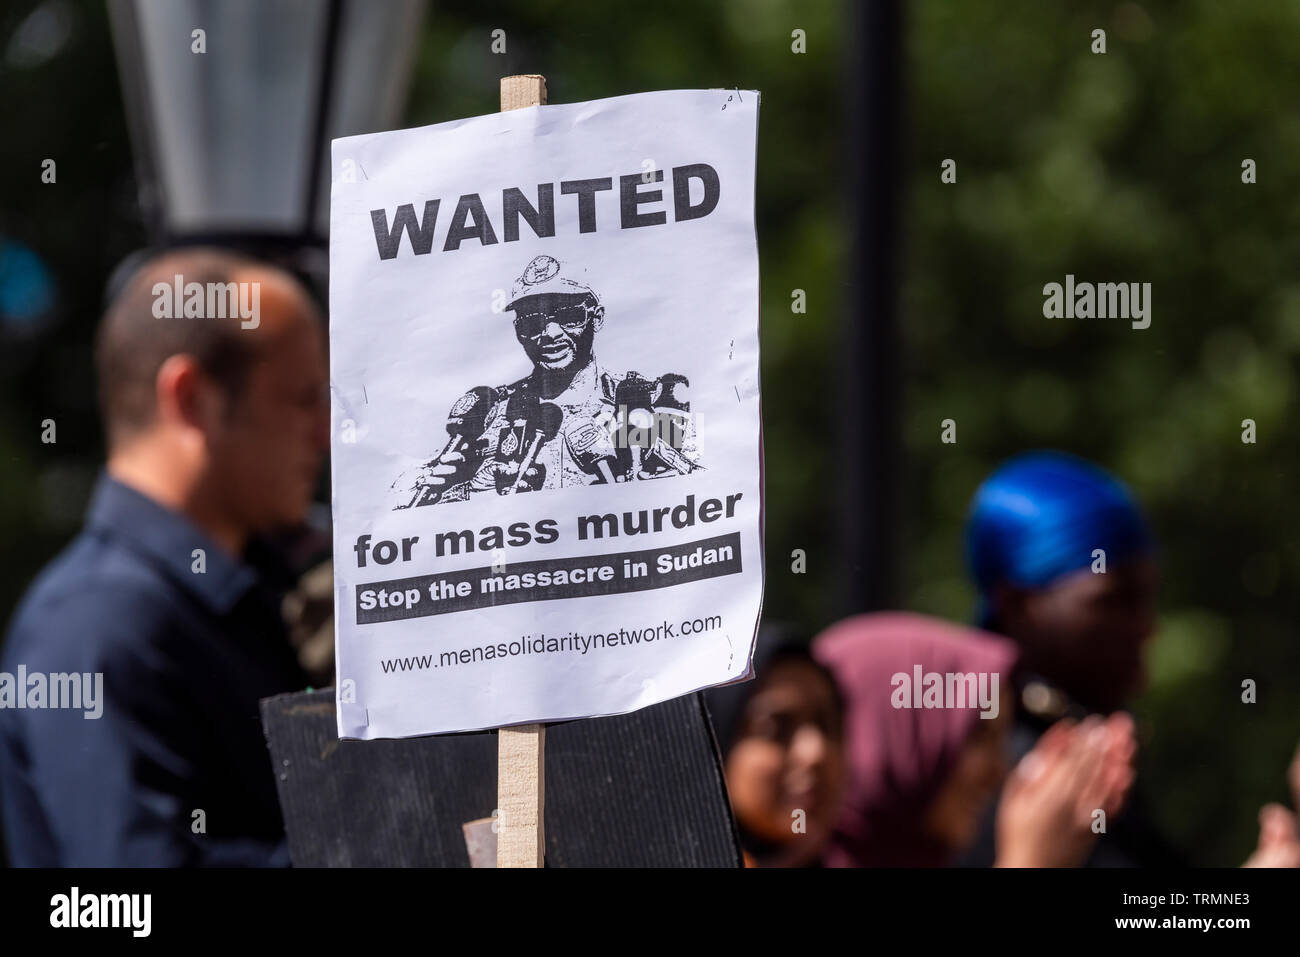 Protest placard. Wanted, for mass murder. Stop the massacre in Sudan. Mena solidarity network. Solidarity with MENA Workers Network. Hemedti image Stock Photo